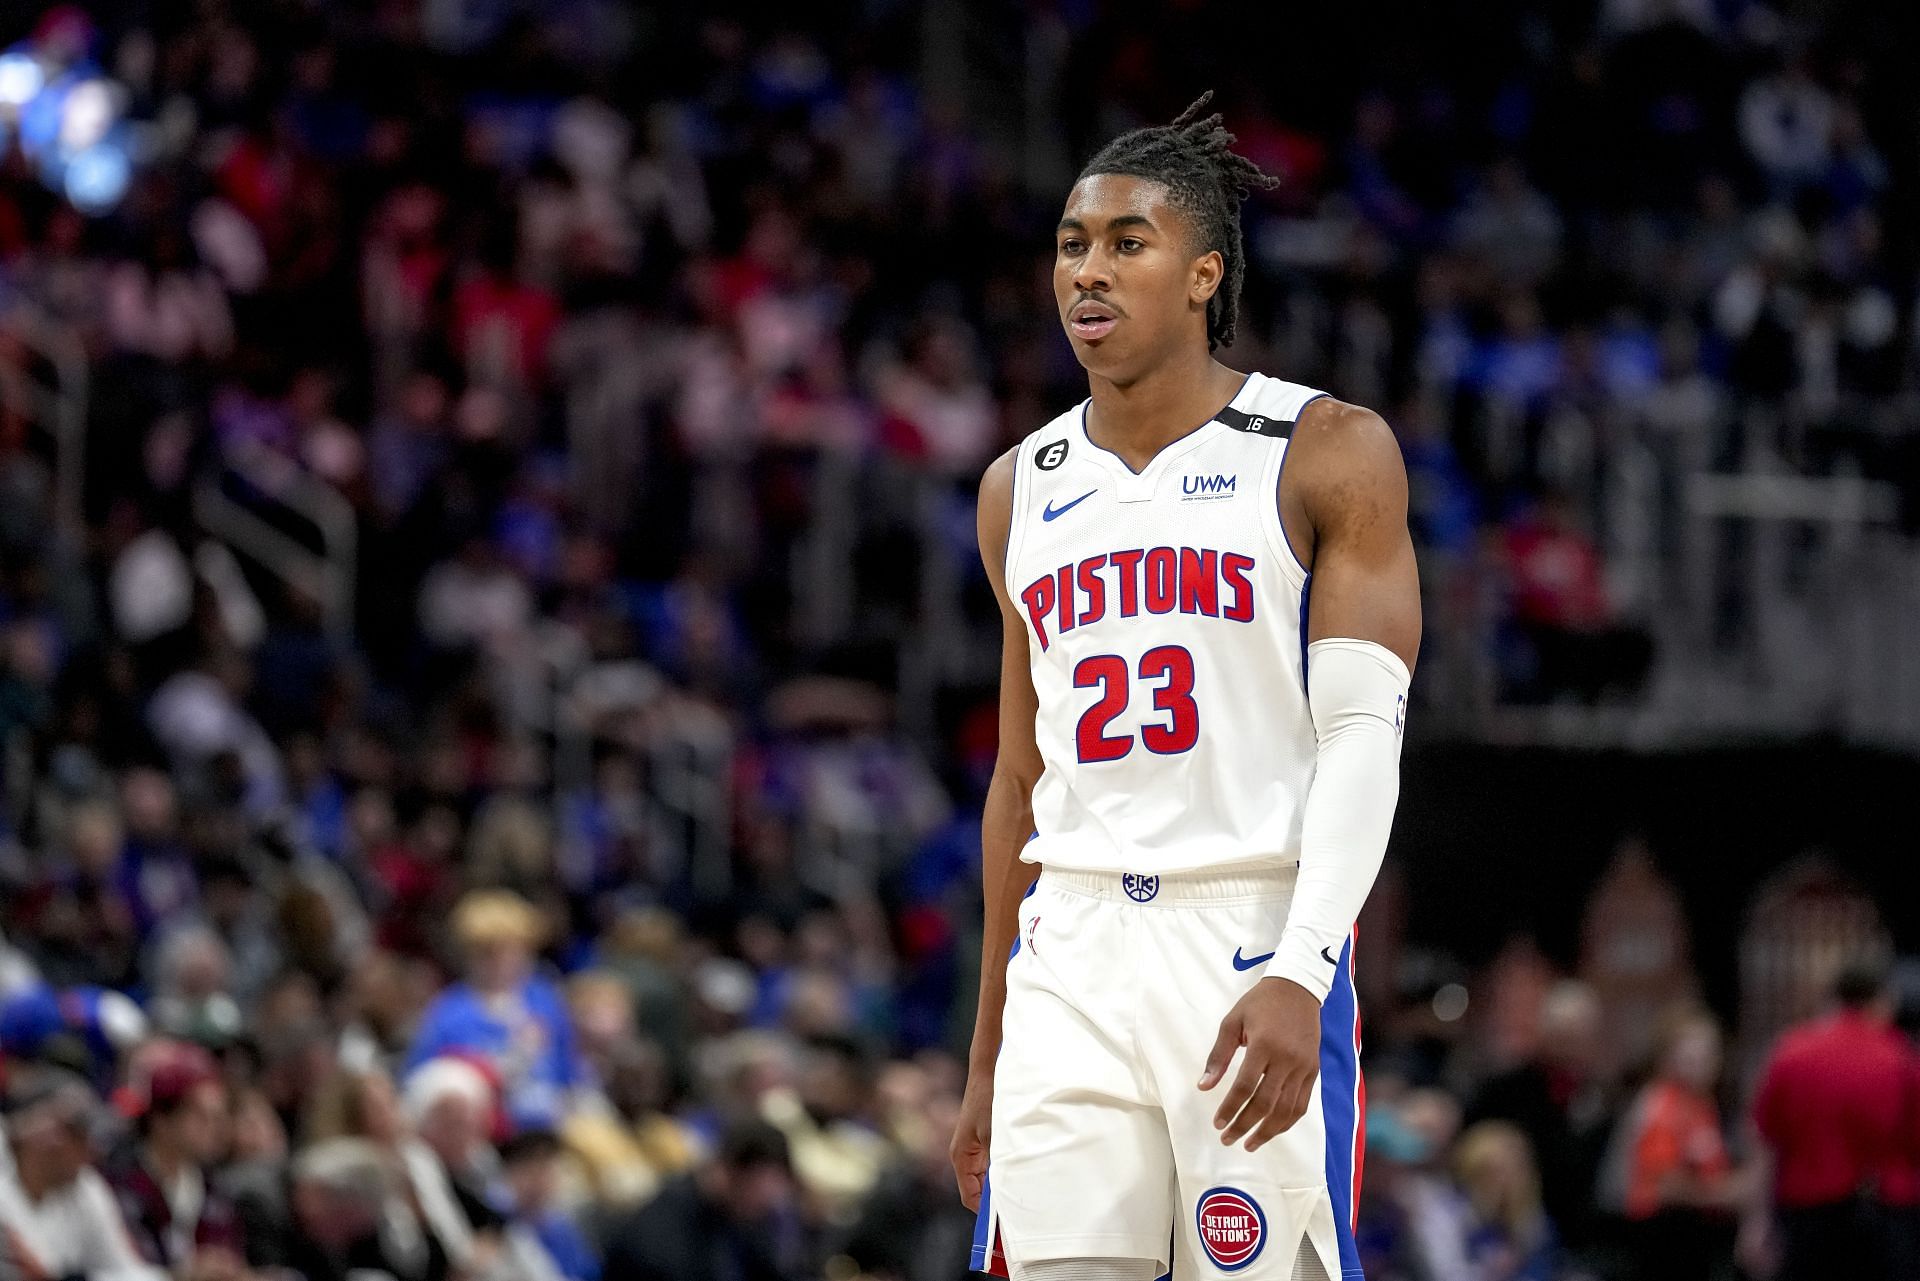 Jaden Ivey had a great debut for the Detroit Pistons against the Orlando Magic.